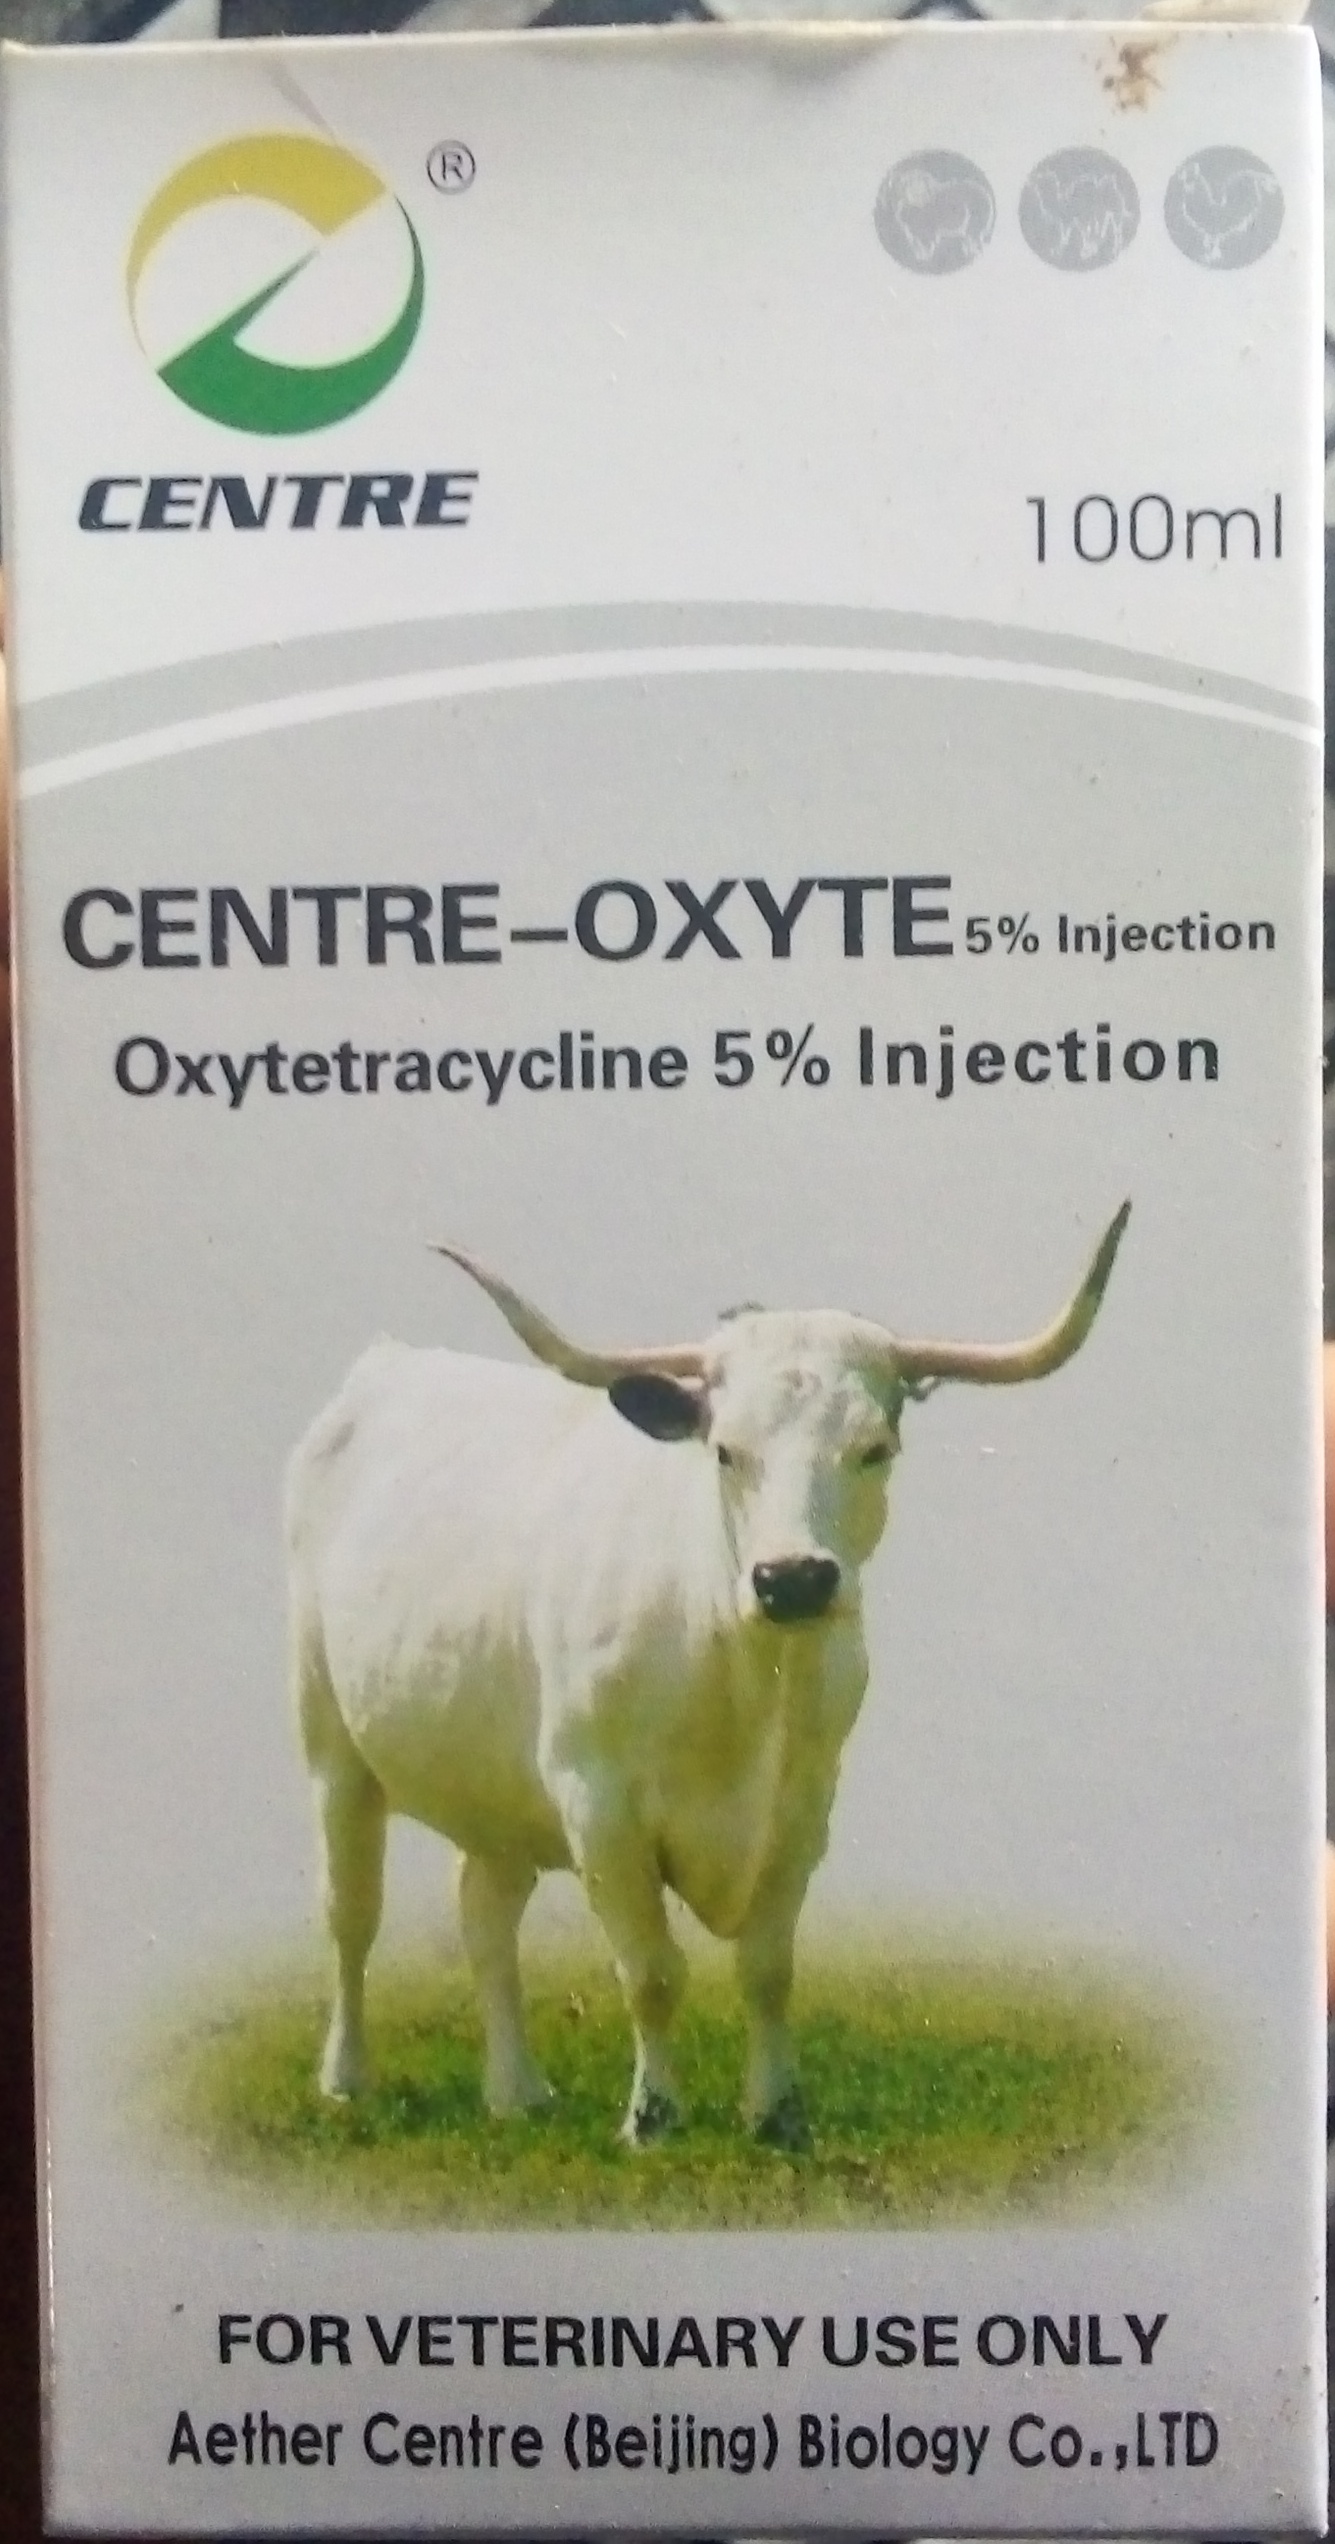 oxytetracycline injection for animals in nigeria